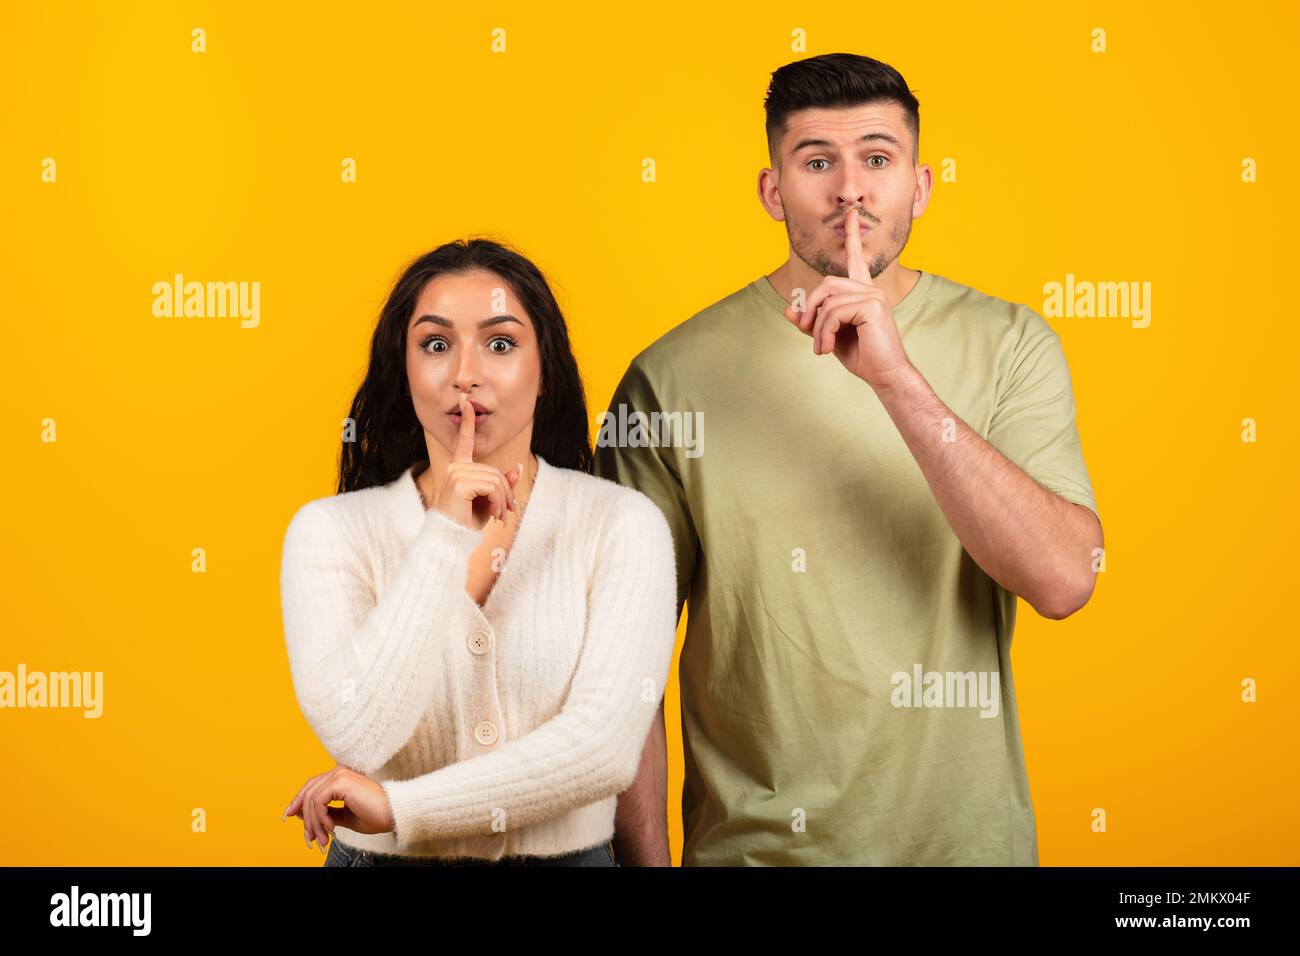 Cheerful inspired pretty young arabic woman and guy in casual put finger to lips, make shhh sign Stock Photo